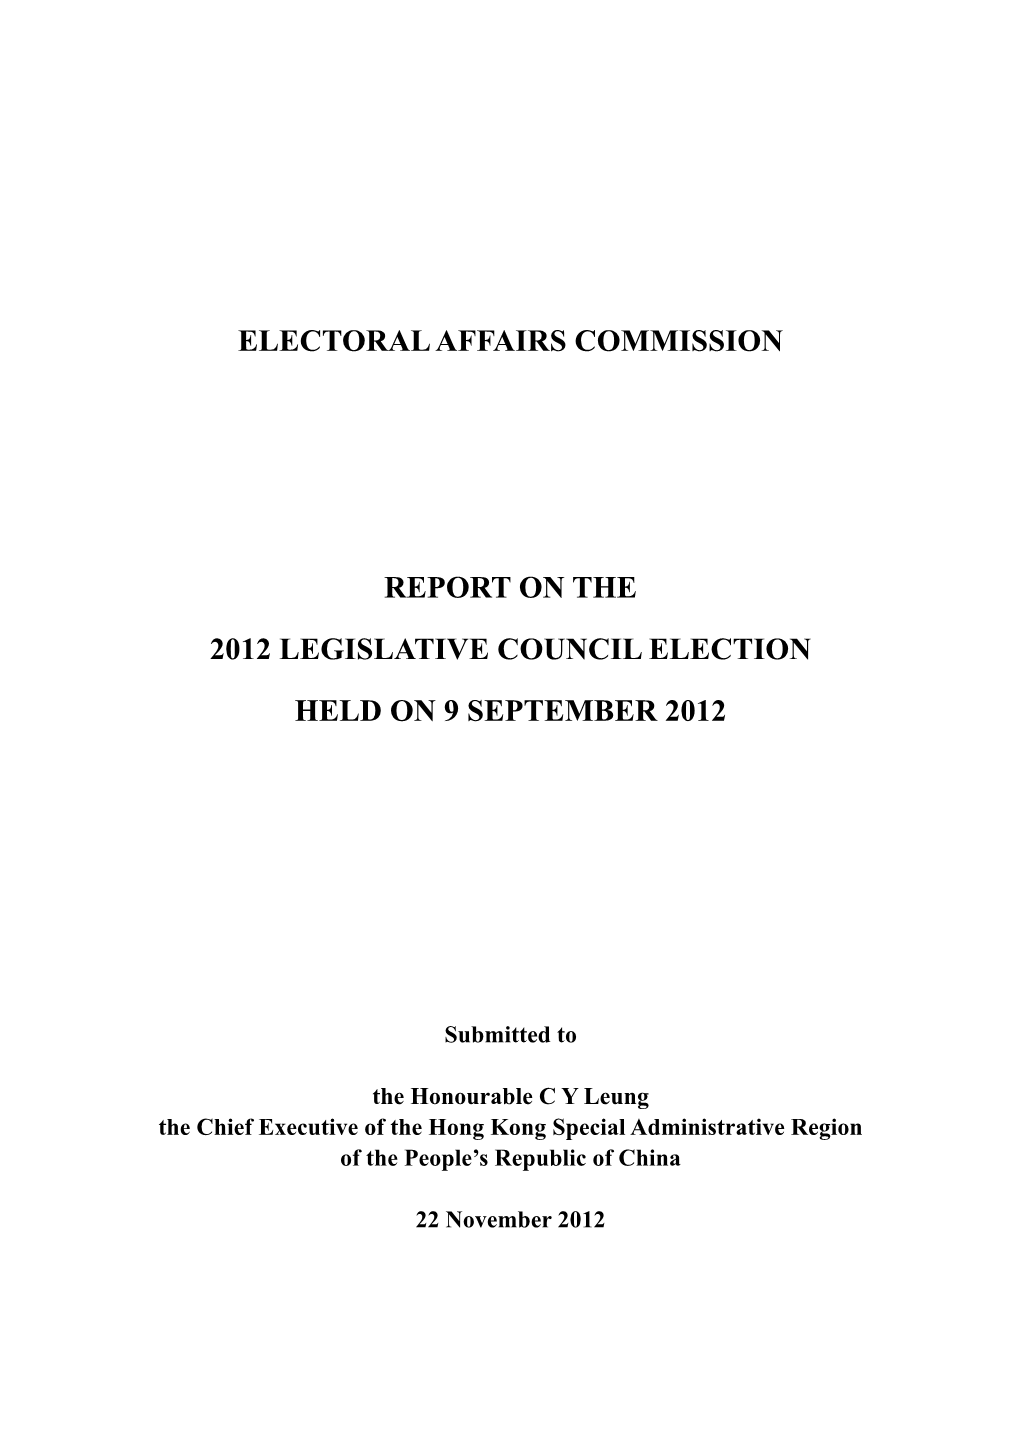 Electoral Affairs Commission Report on the 2012 Legco Election